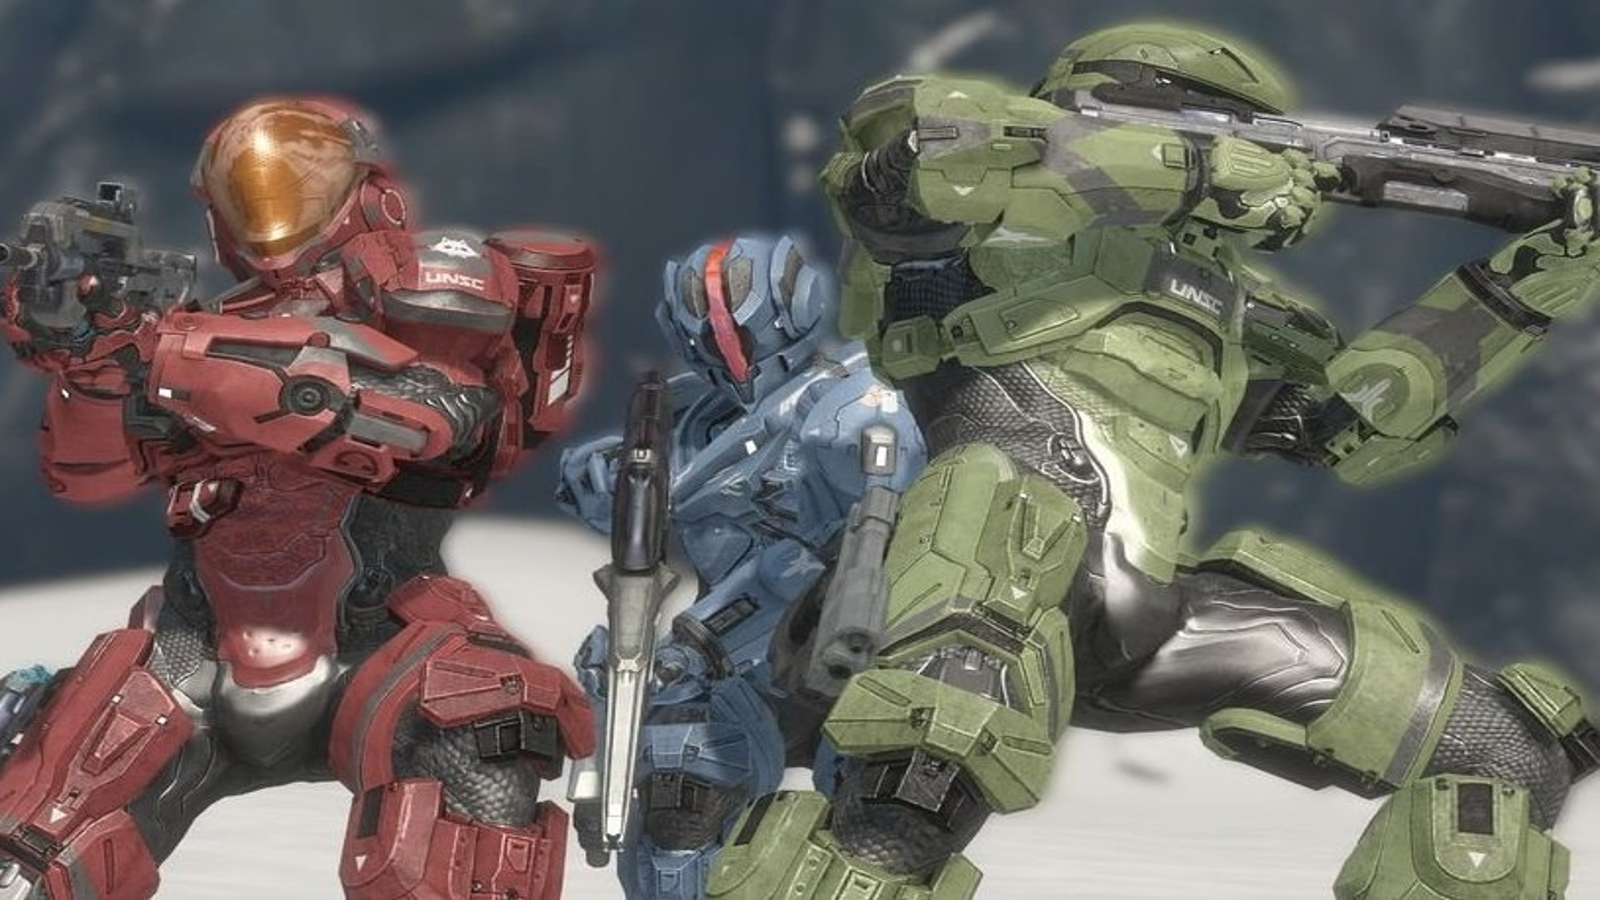 Halo: The Master Chief Collection gets Halo 4's Spartan Ops